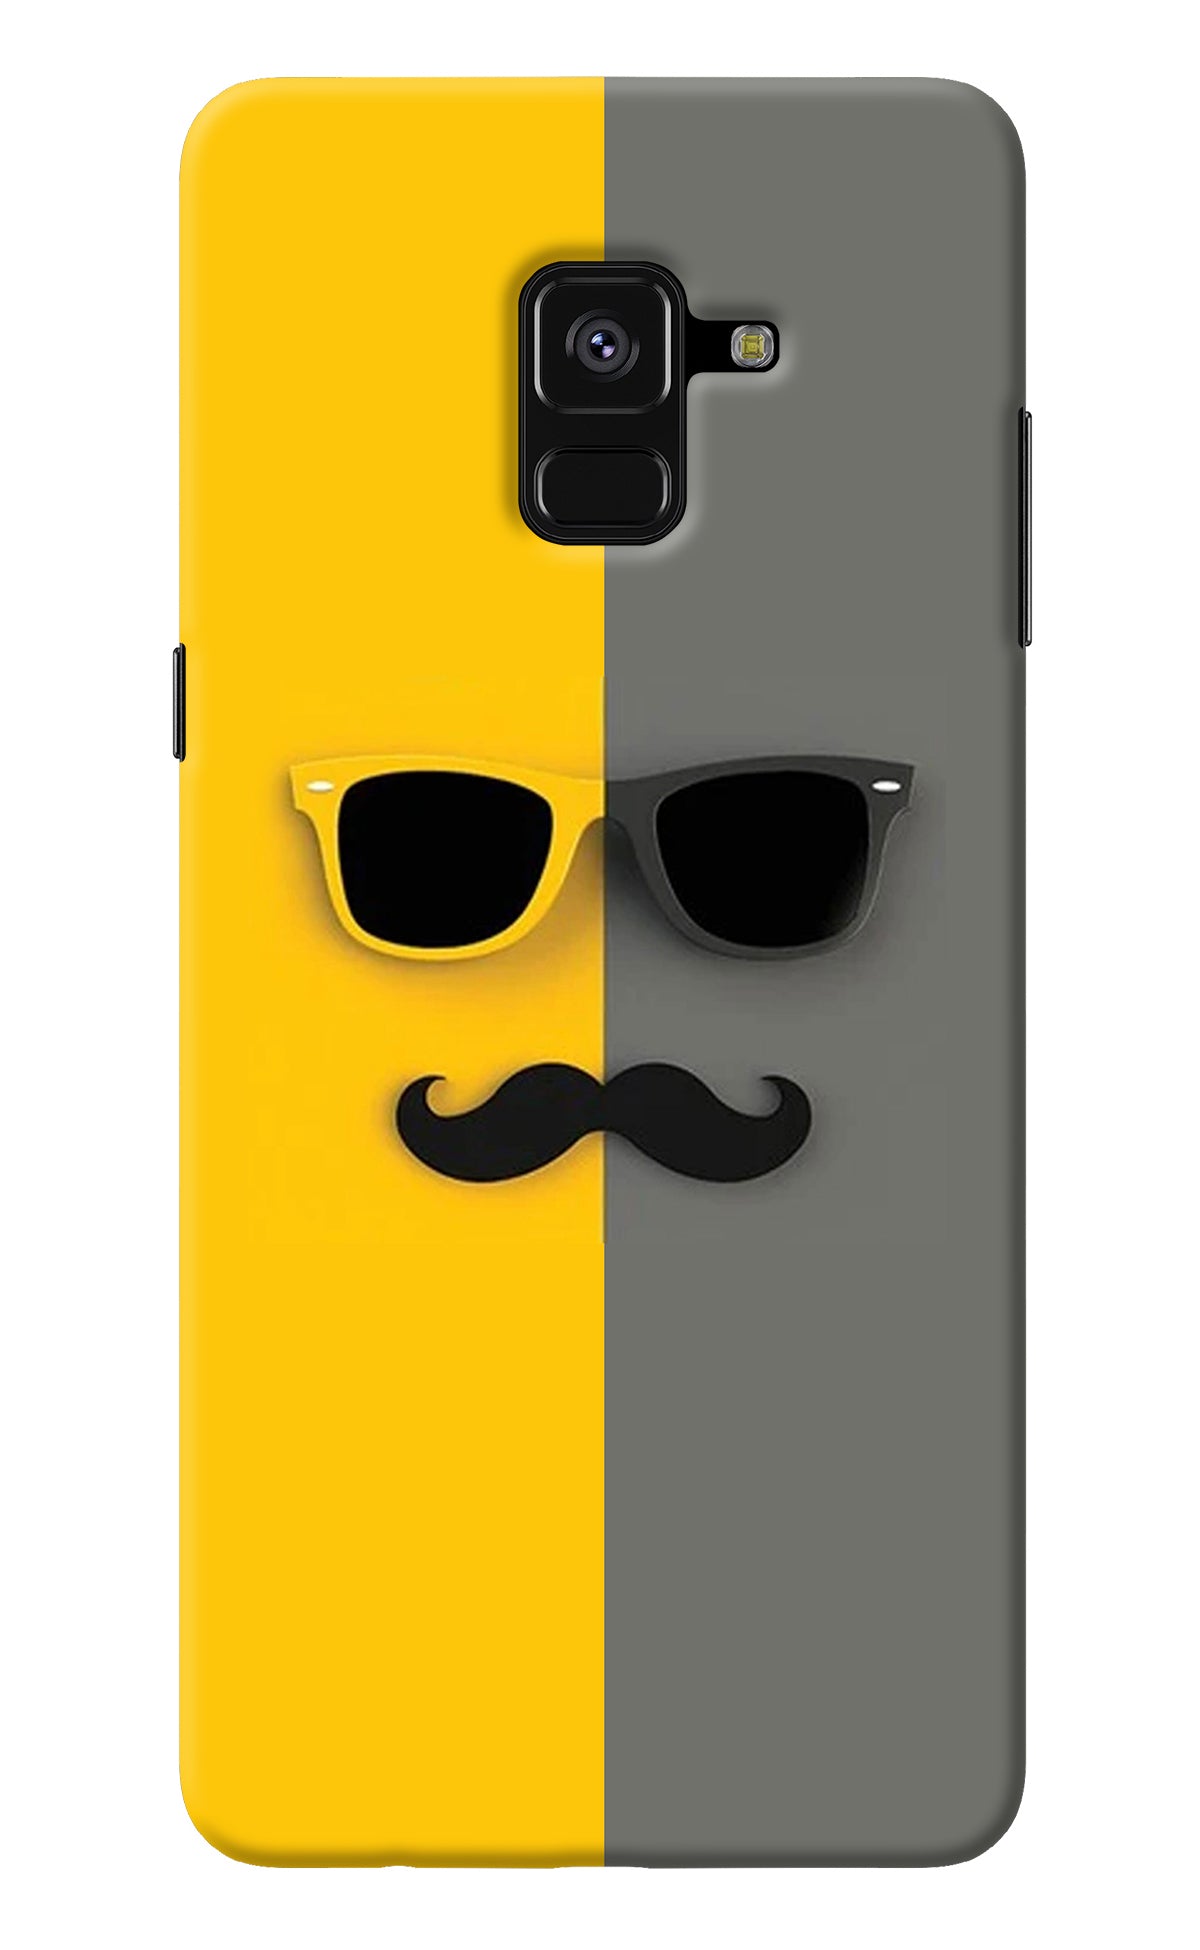 Sunglasses with Mustache Samsung A8 plus Back Cover